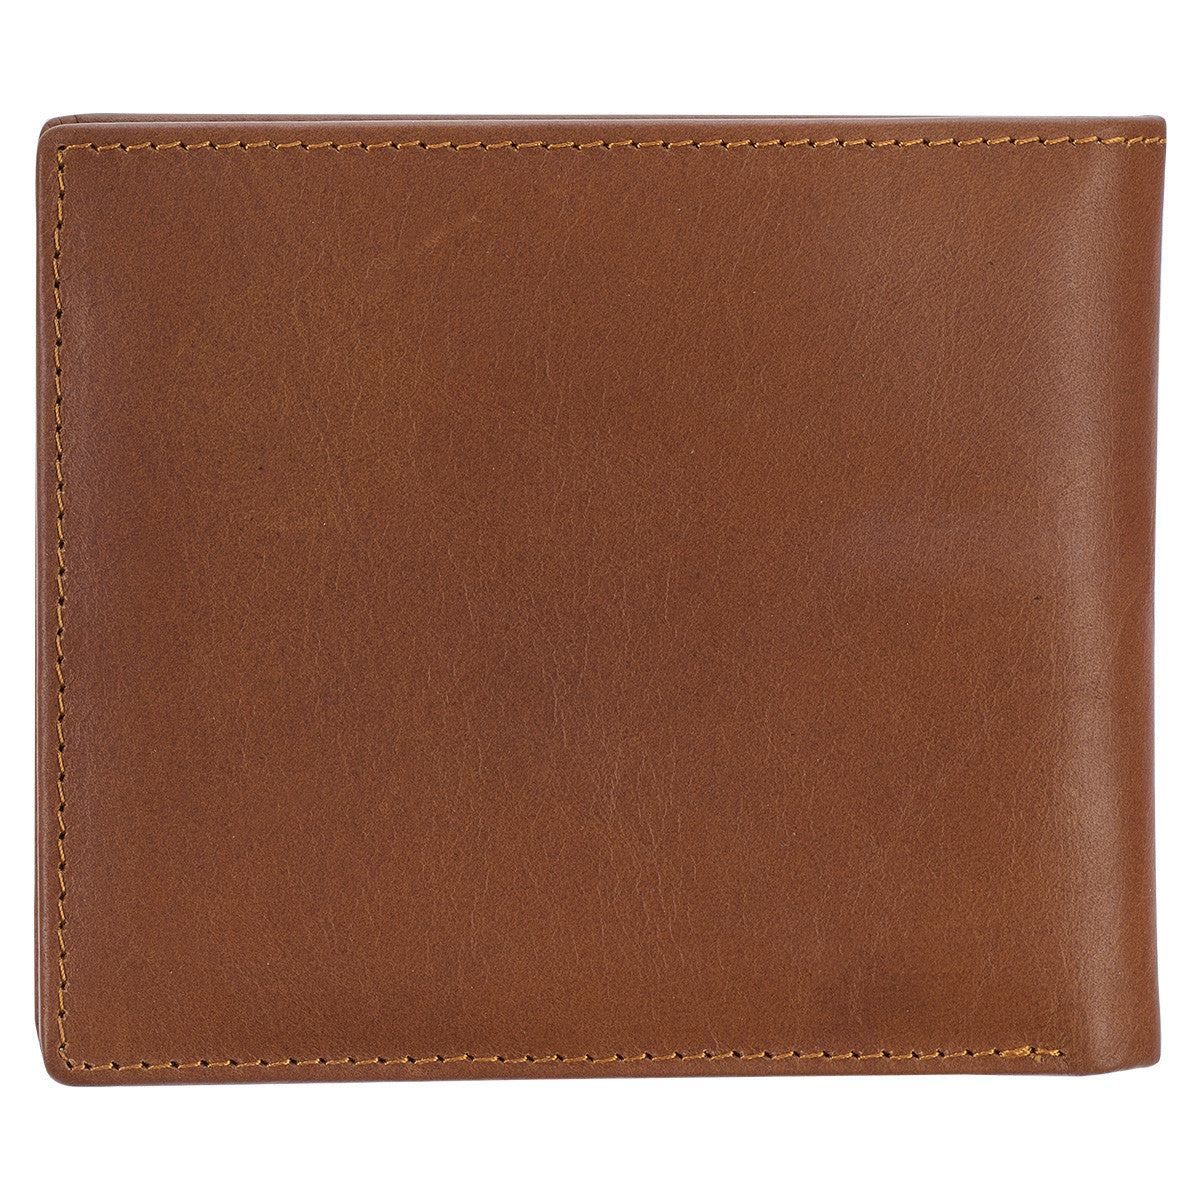 Seek First the Kingdom Saddle Tan Genuine Leather Wallet - Matthew 6:33 - The Christian Gift Company